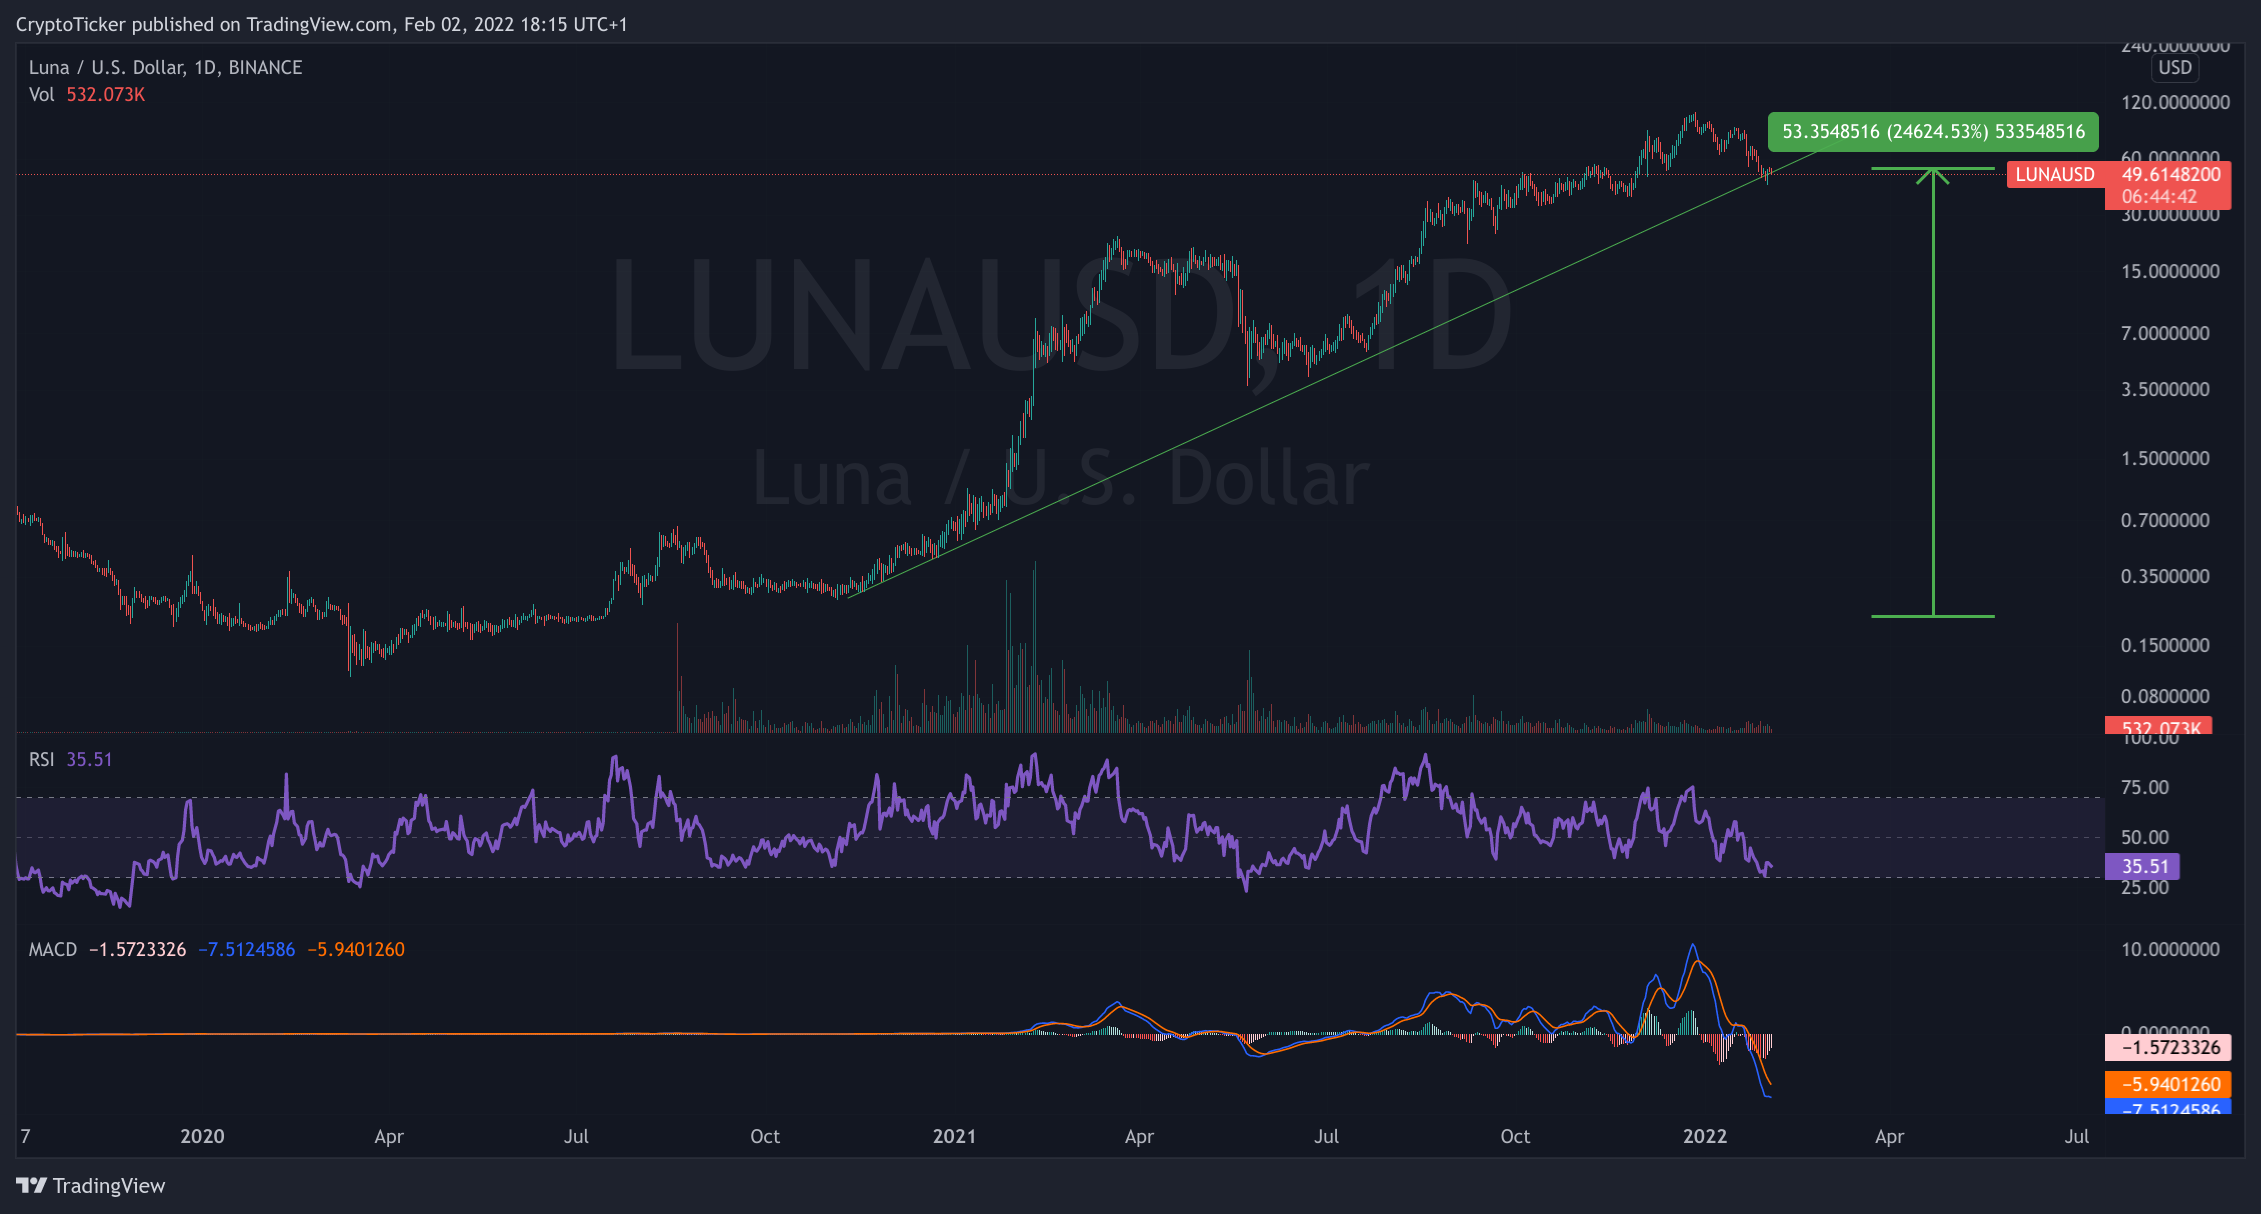 LUNA/USD 1-day chart showing LUNA price Booming in 2 years